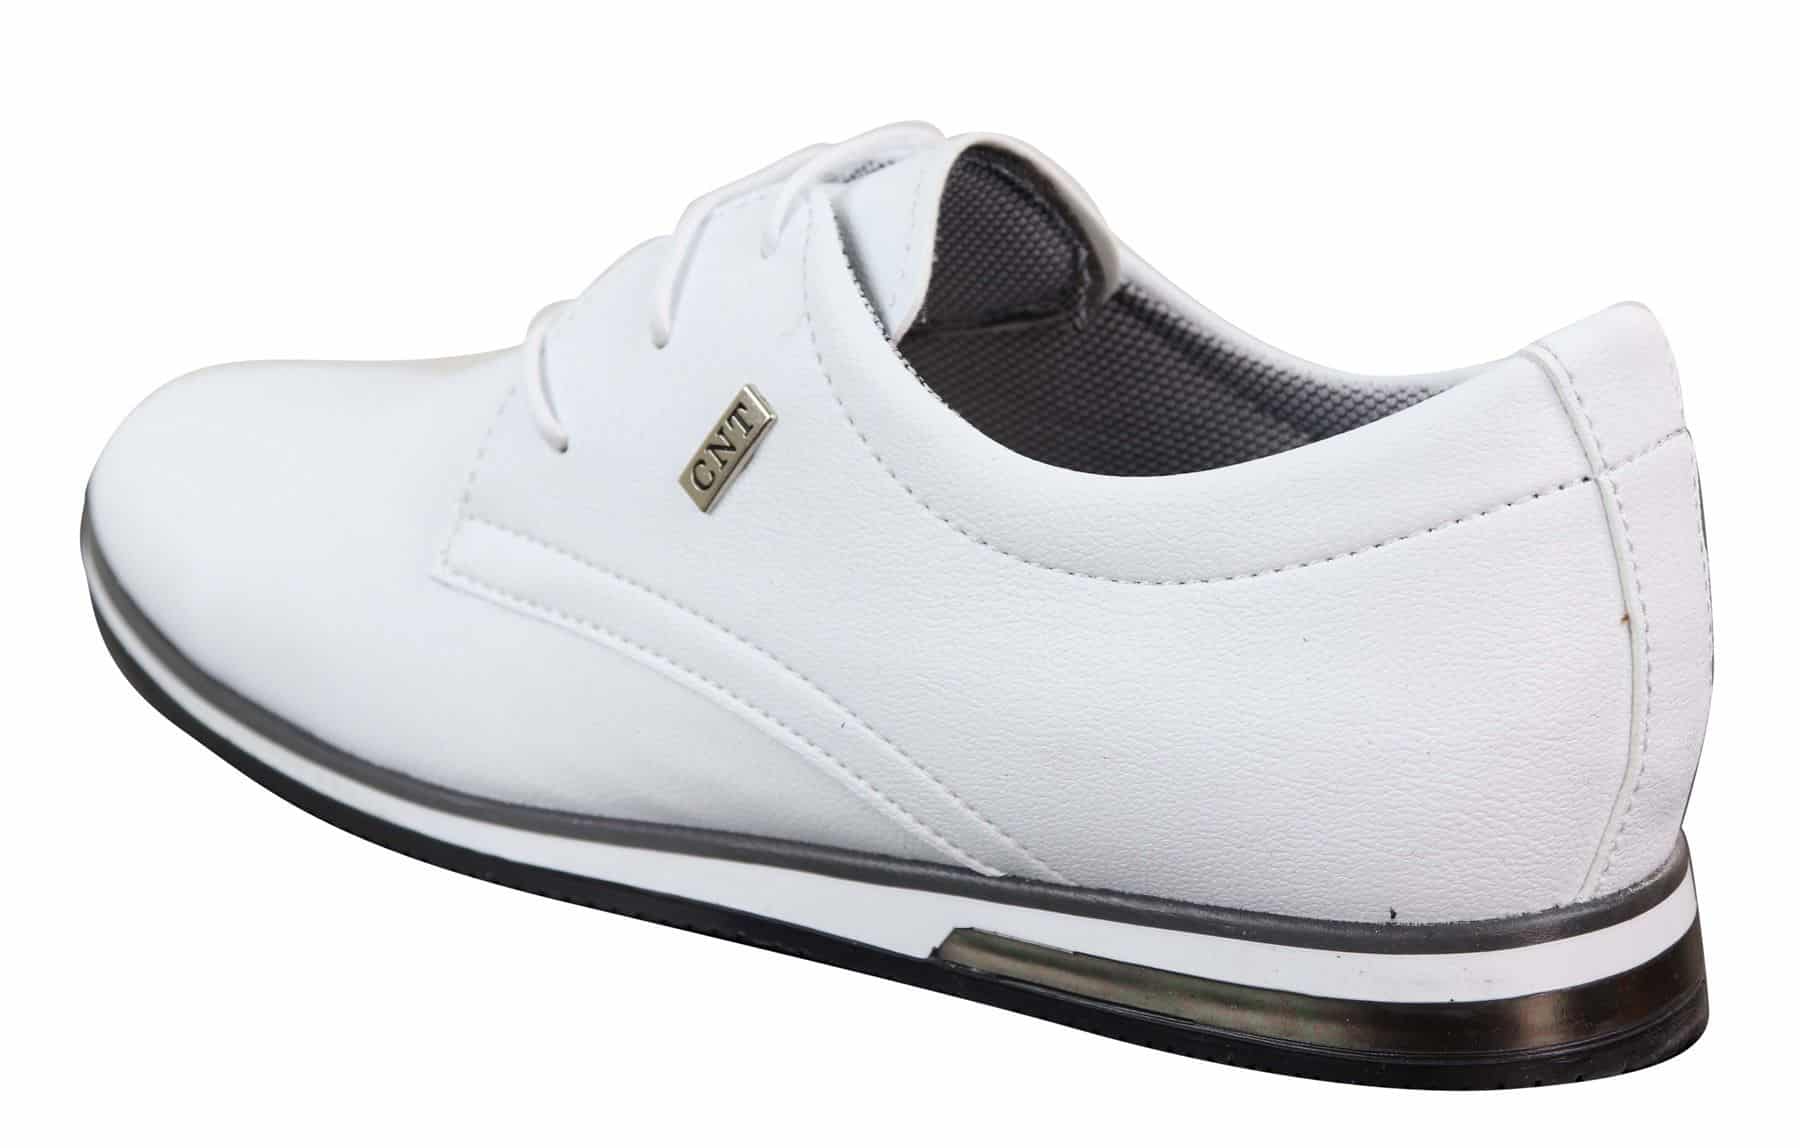 Mens PU Leather Smart-Casual Shoes | Happy Gentleman